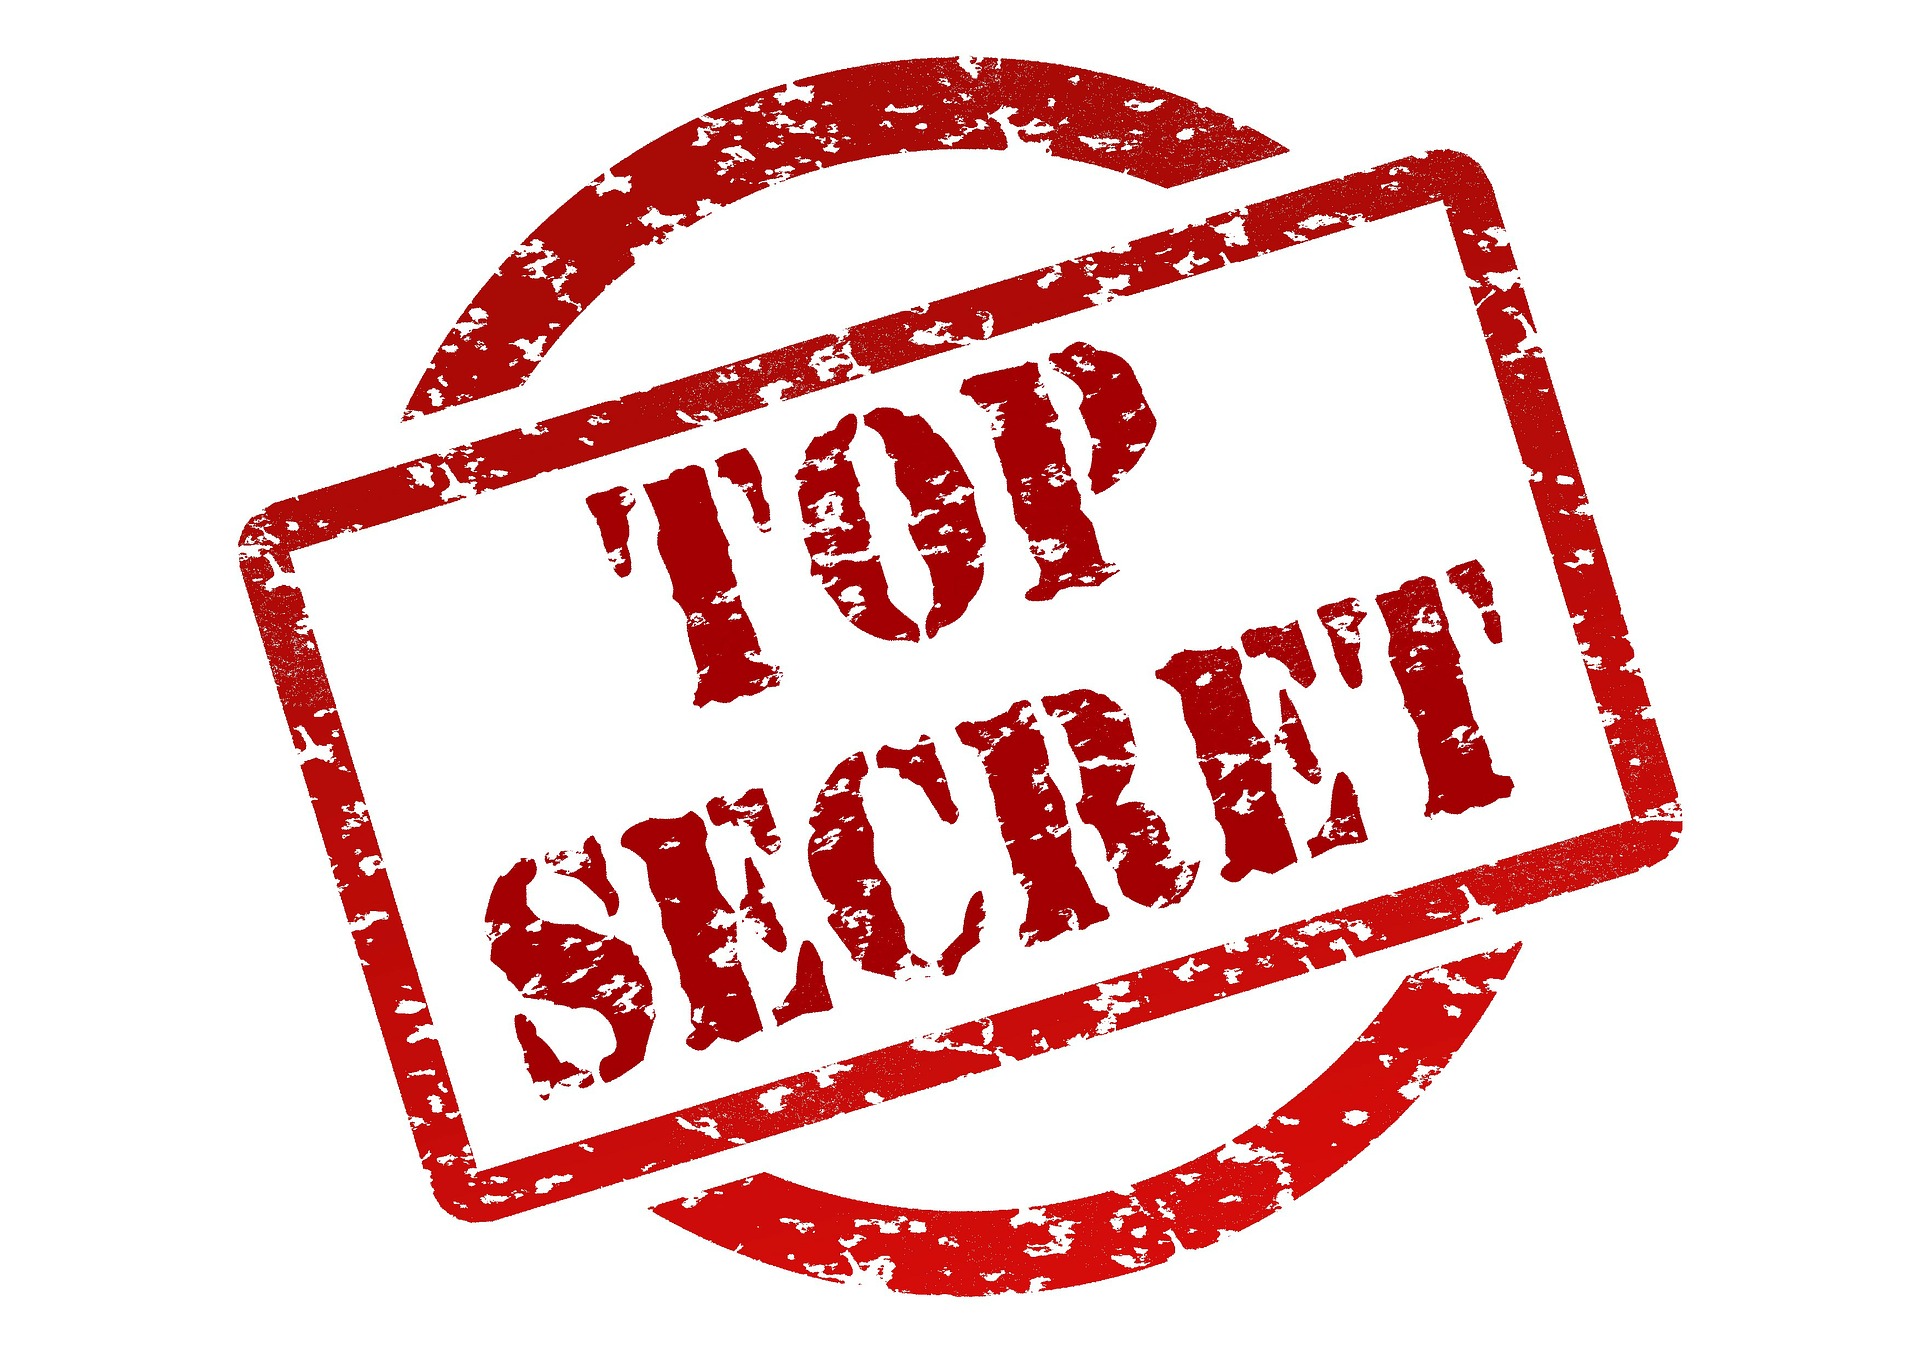 Is There a Secret Shopper in your Midst? - VQ Strategies